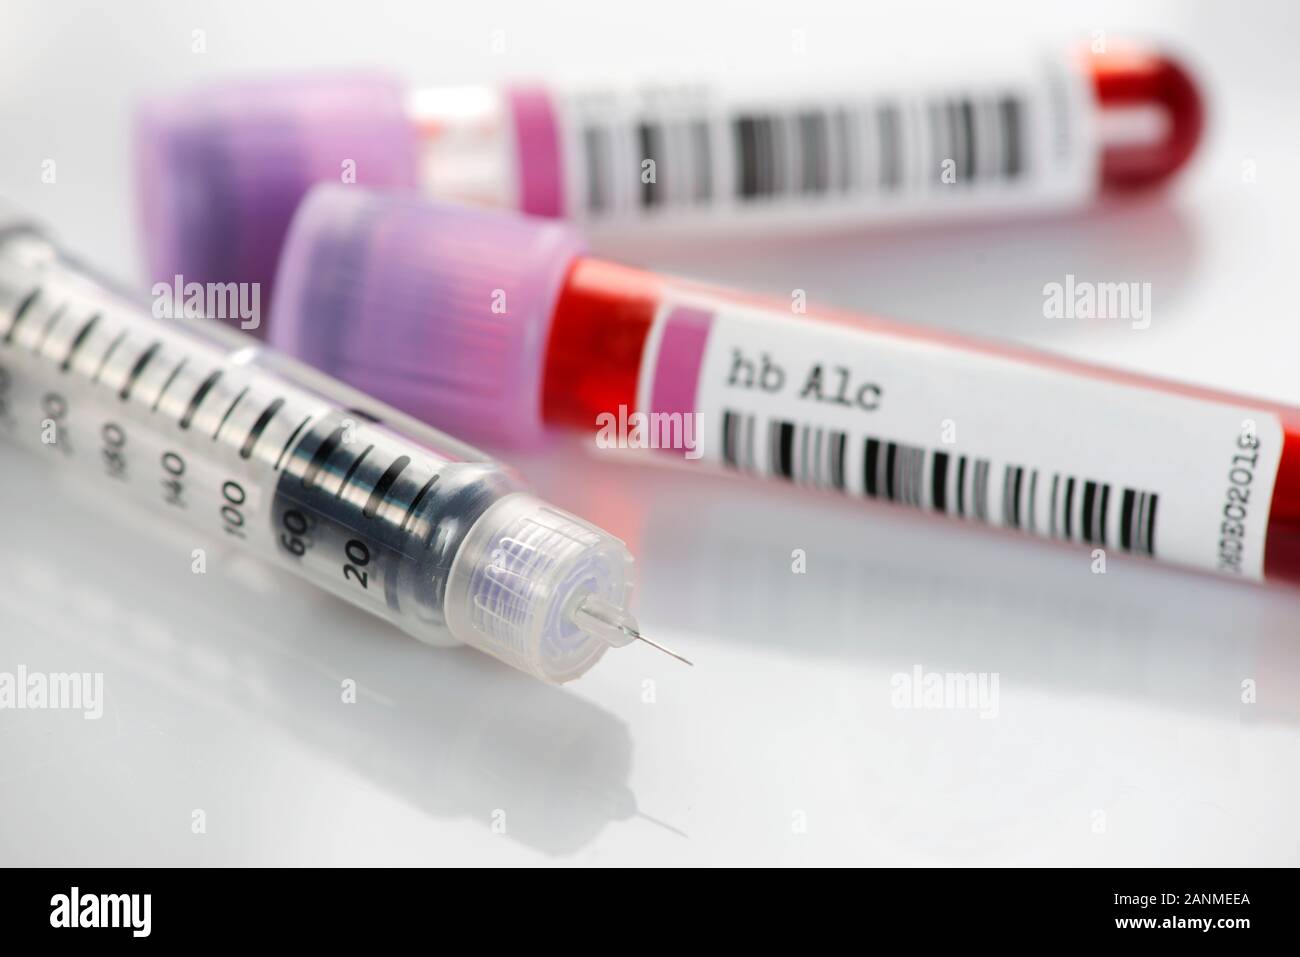 Insulin pen and hemoglobin A1c blood test tubes. The hbA1c test can asses glucose control and insulin regimen effectiveness in diabetic individuals. Stock Photo